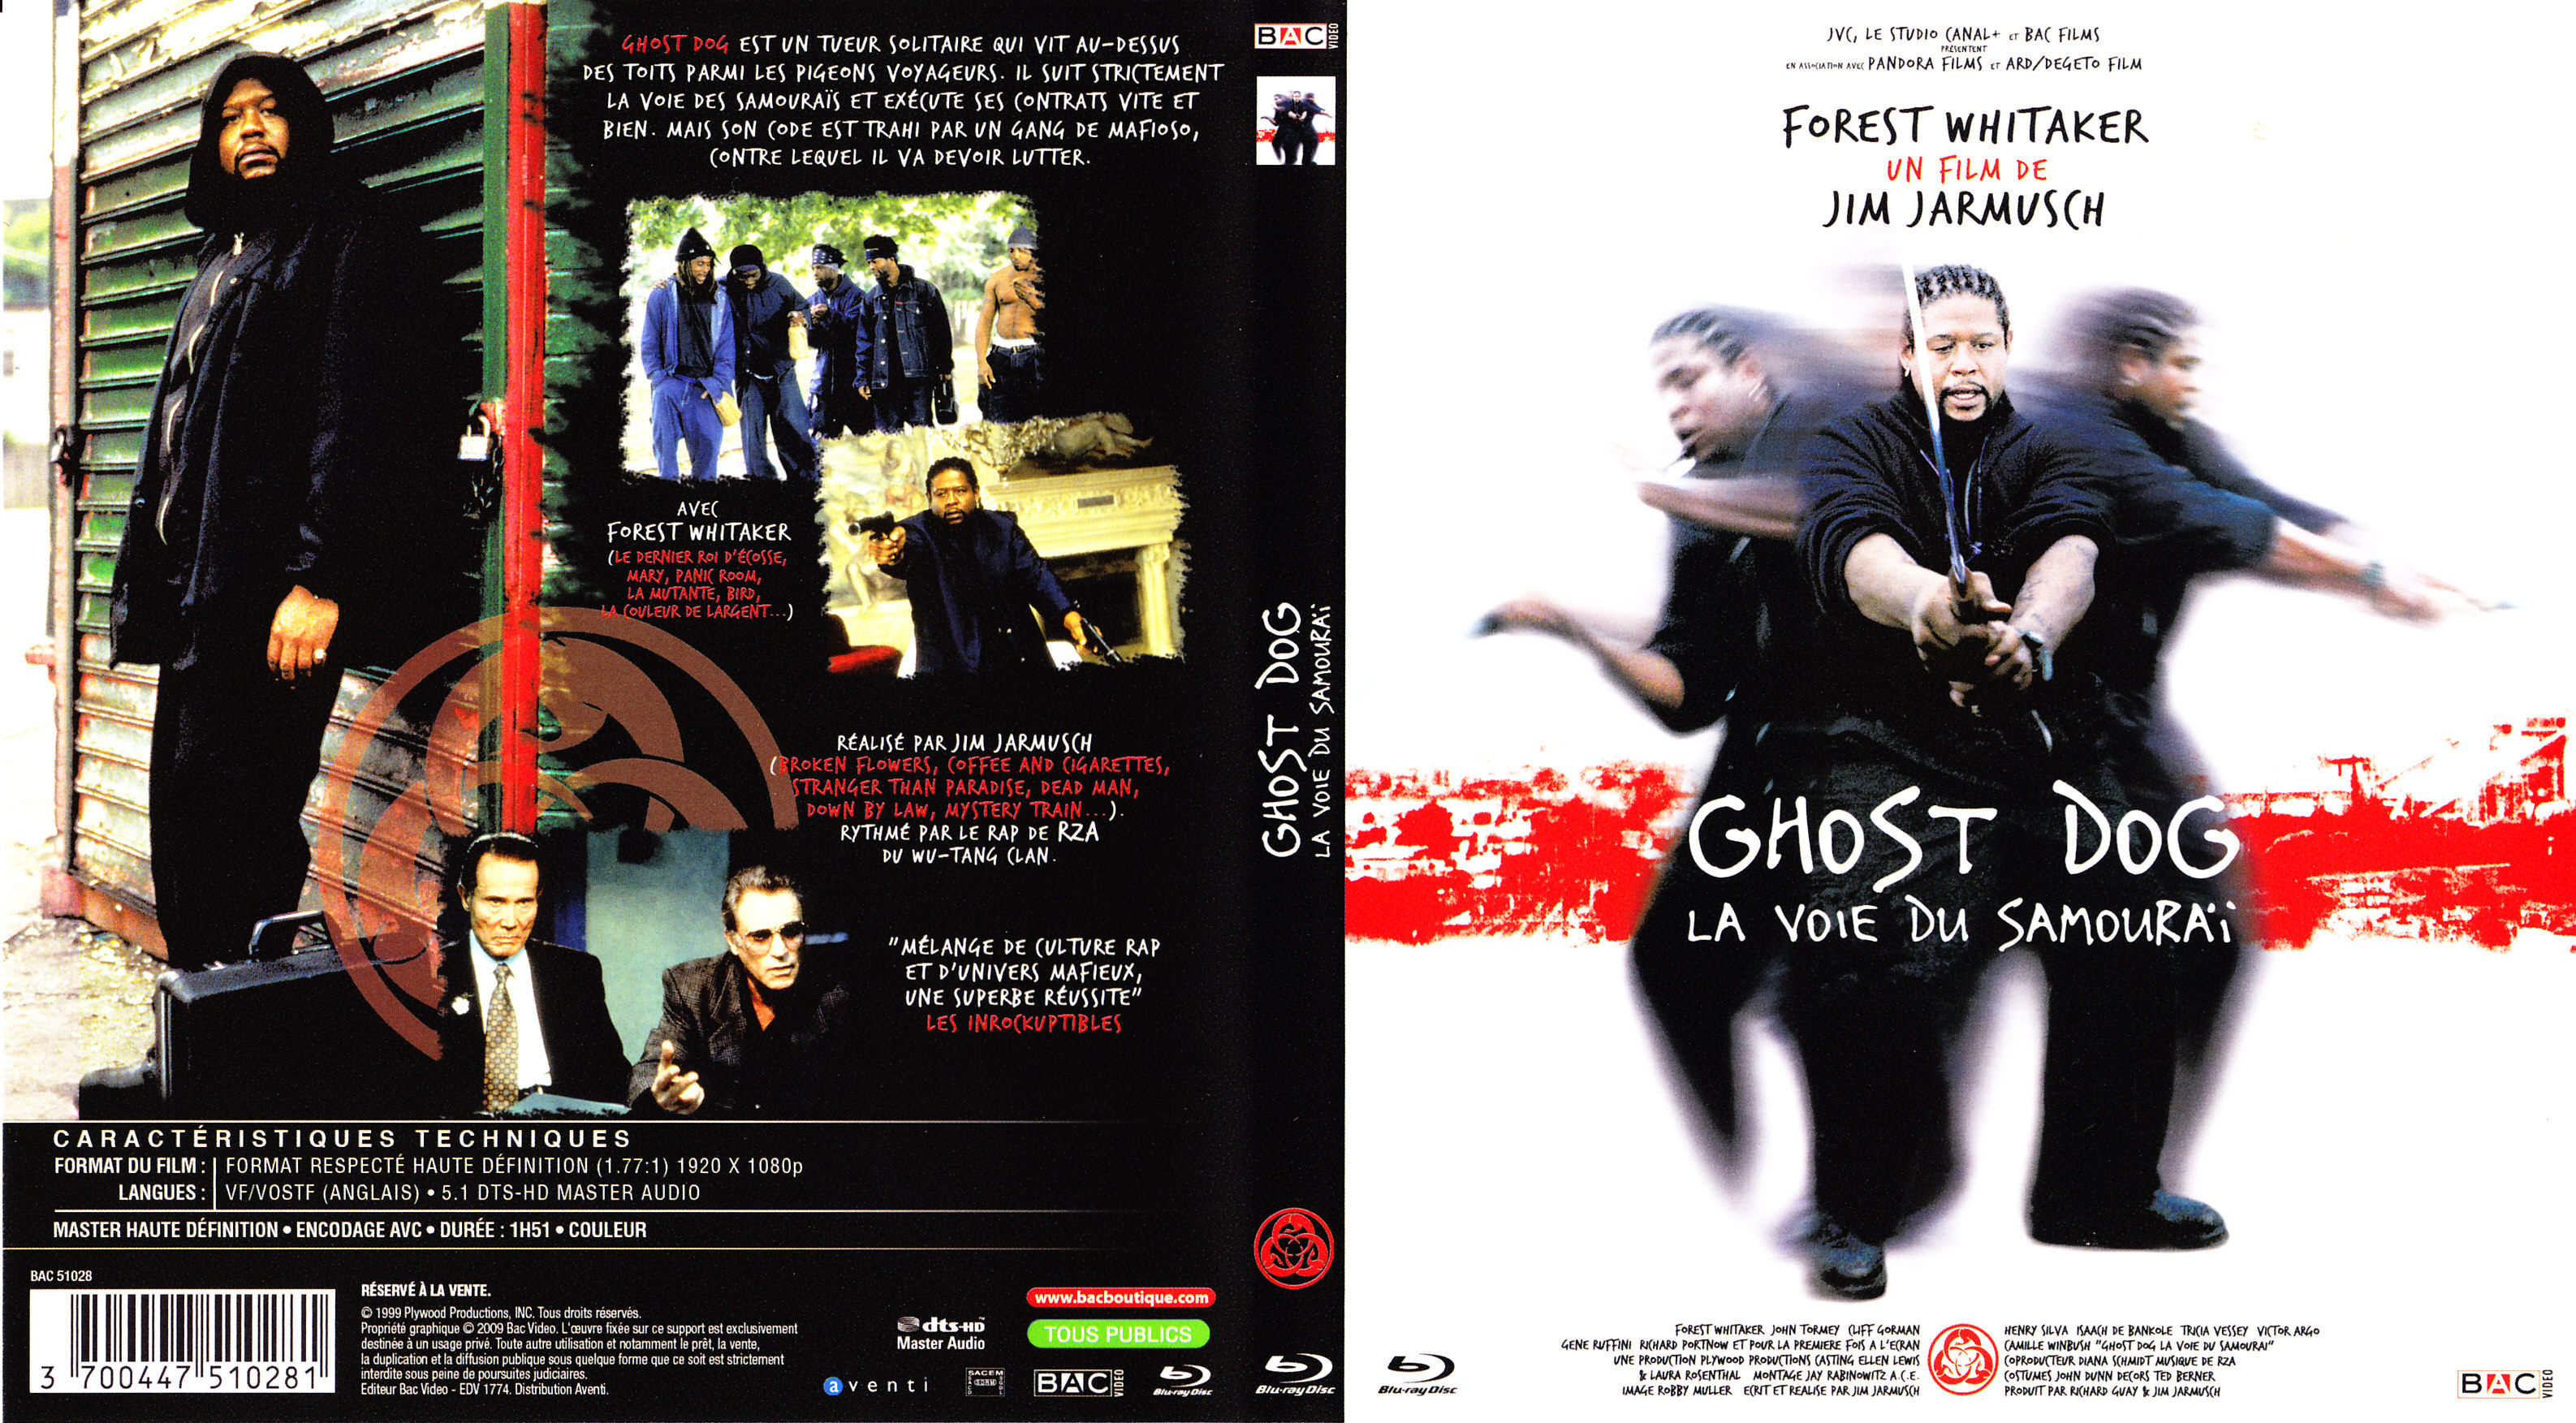 Jaquette DVD Ghost dog (BLU-RAY)